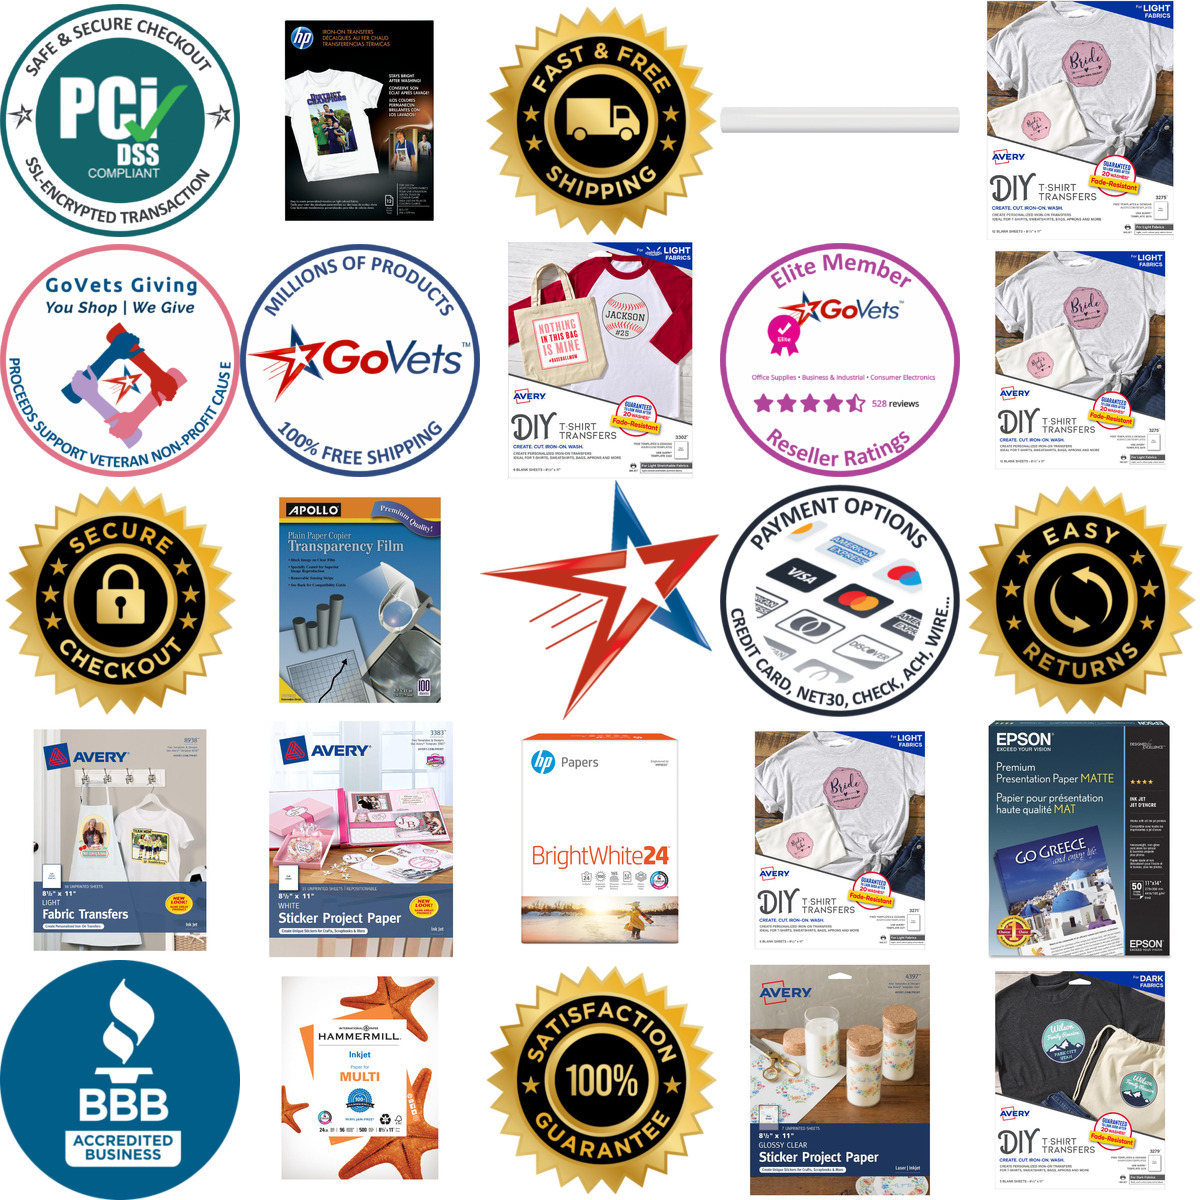 A selection of Inkjet Printer Paper products on GoVets